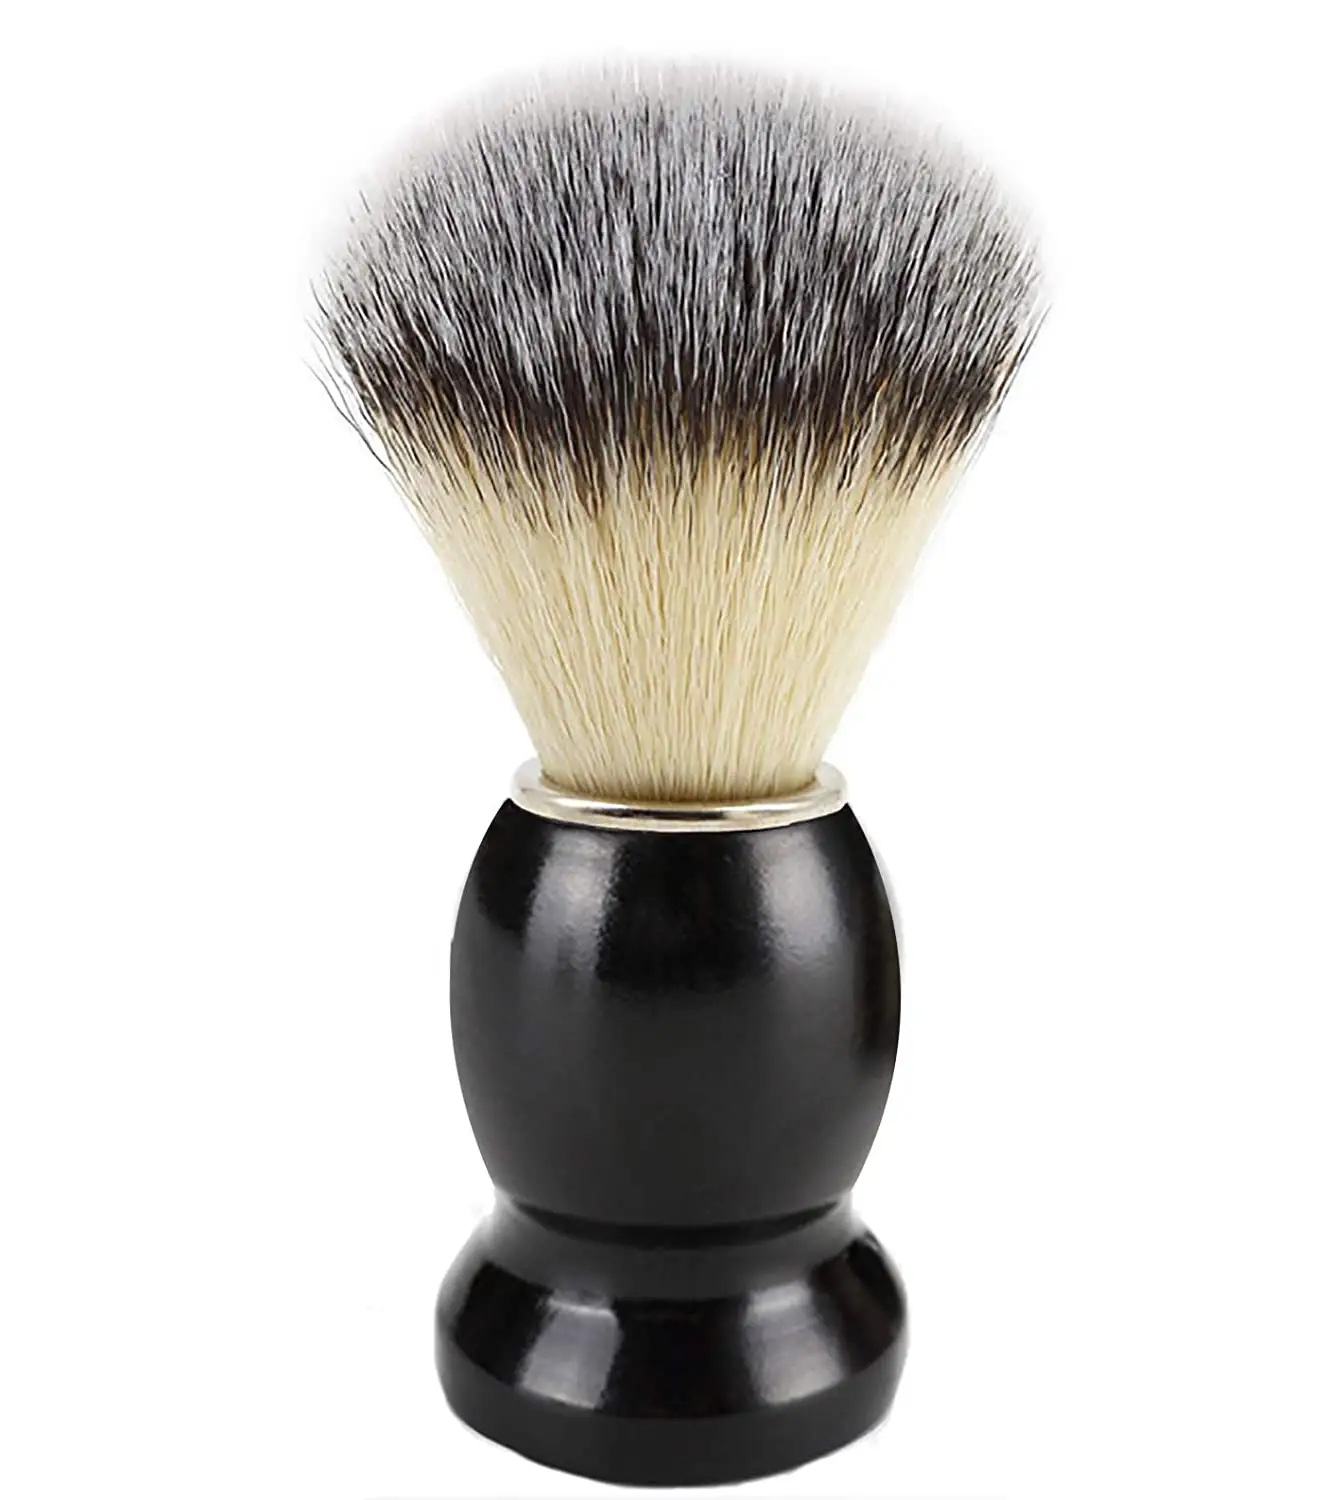 Hand Crafted Shaving Brush for Men, Wood Handle Hair Salon Shave Brush for Wet Shave Safety Razor